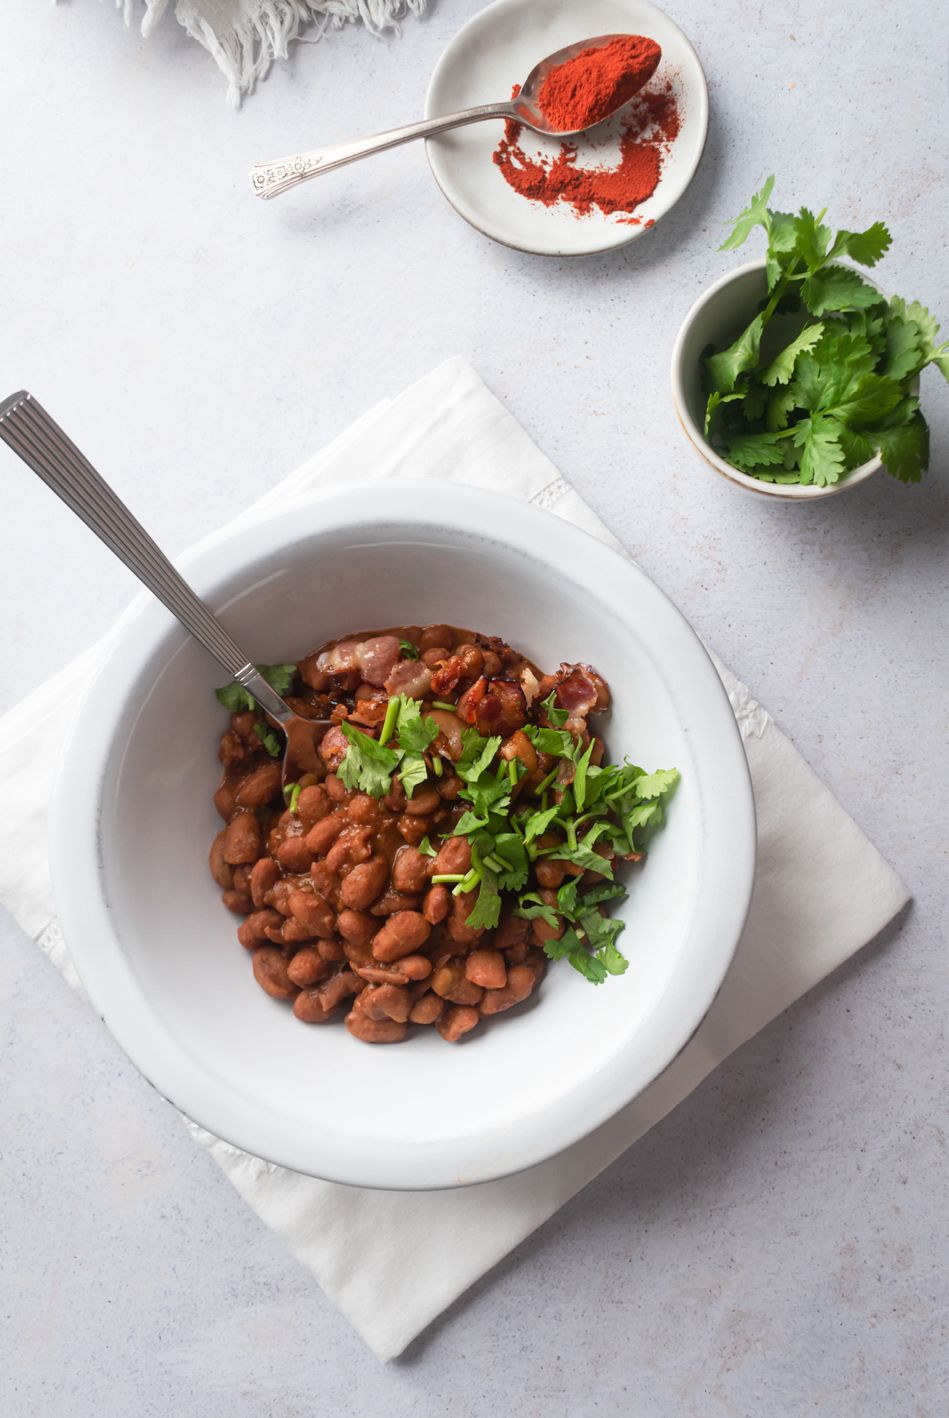 Drunken pinto beans in a white bowl with cilantro, bacon pieces, and paprika on the side.